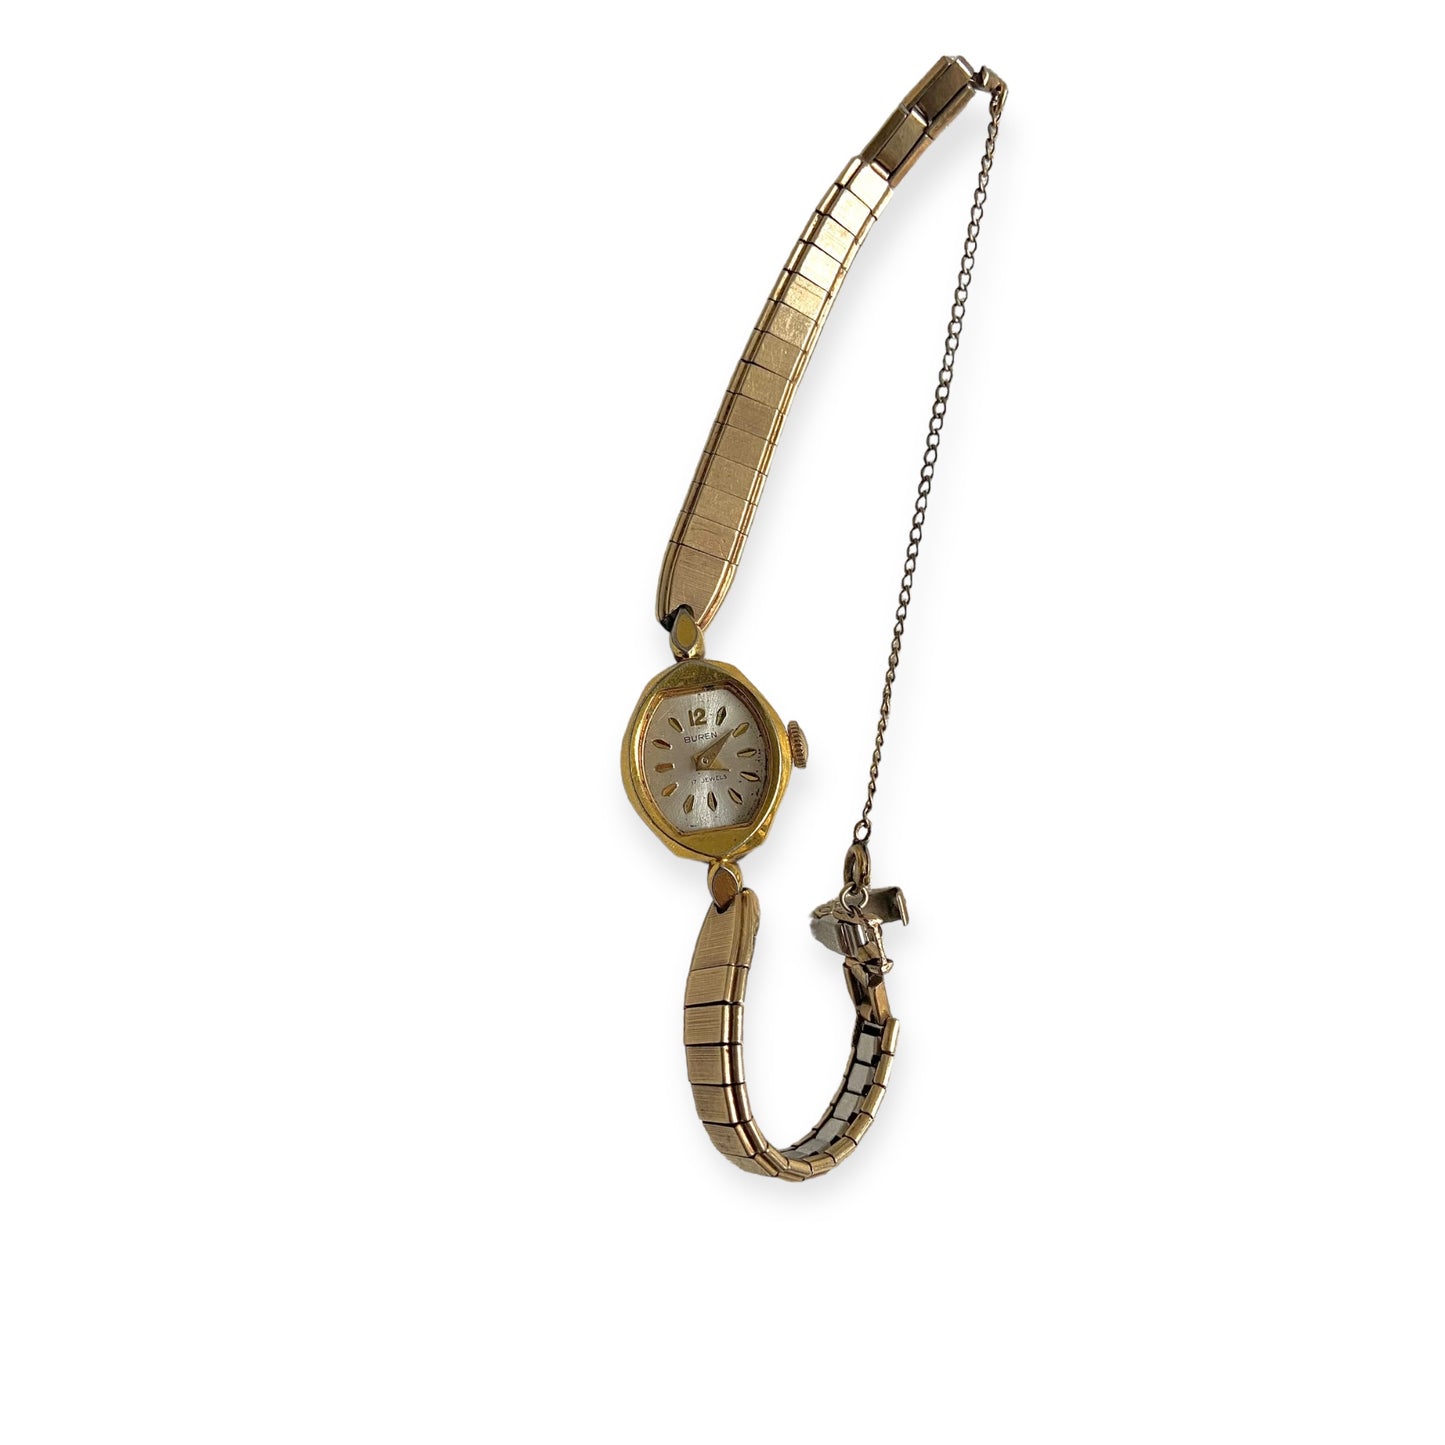 One-of-one | Buren 17 jewels gold watch w/ safety chain